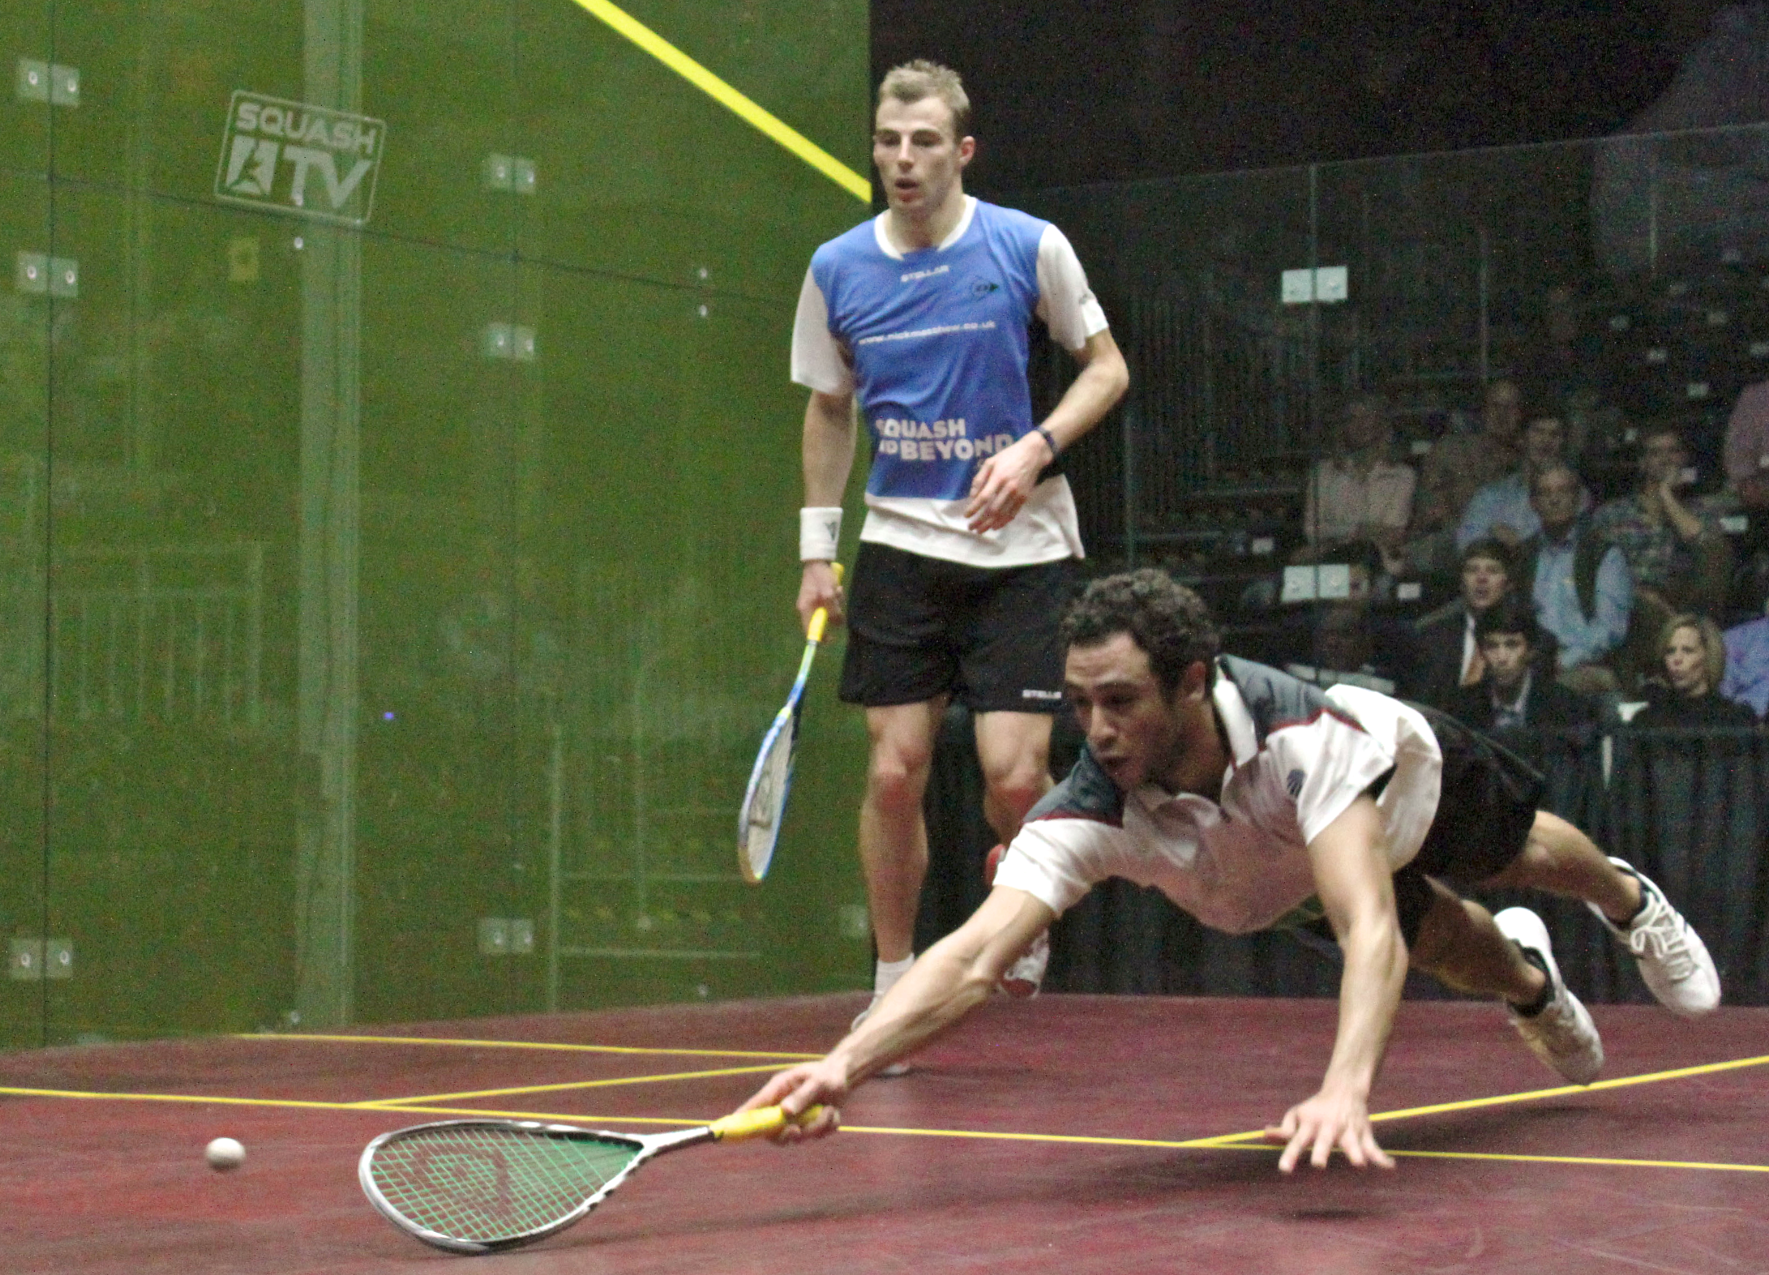 Still seeking to bounce back from injuries suffered over the last year, Ramy Ashour was extra-motivated against Nick Matthew in the semifinals after losing their five-game final in 2011. Ashour booked his place in the finals again, stopping Matthew, 12-10, 13-11, 11-3.